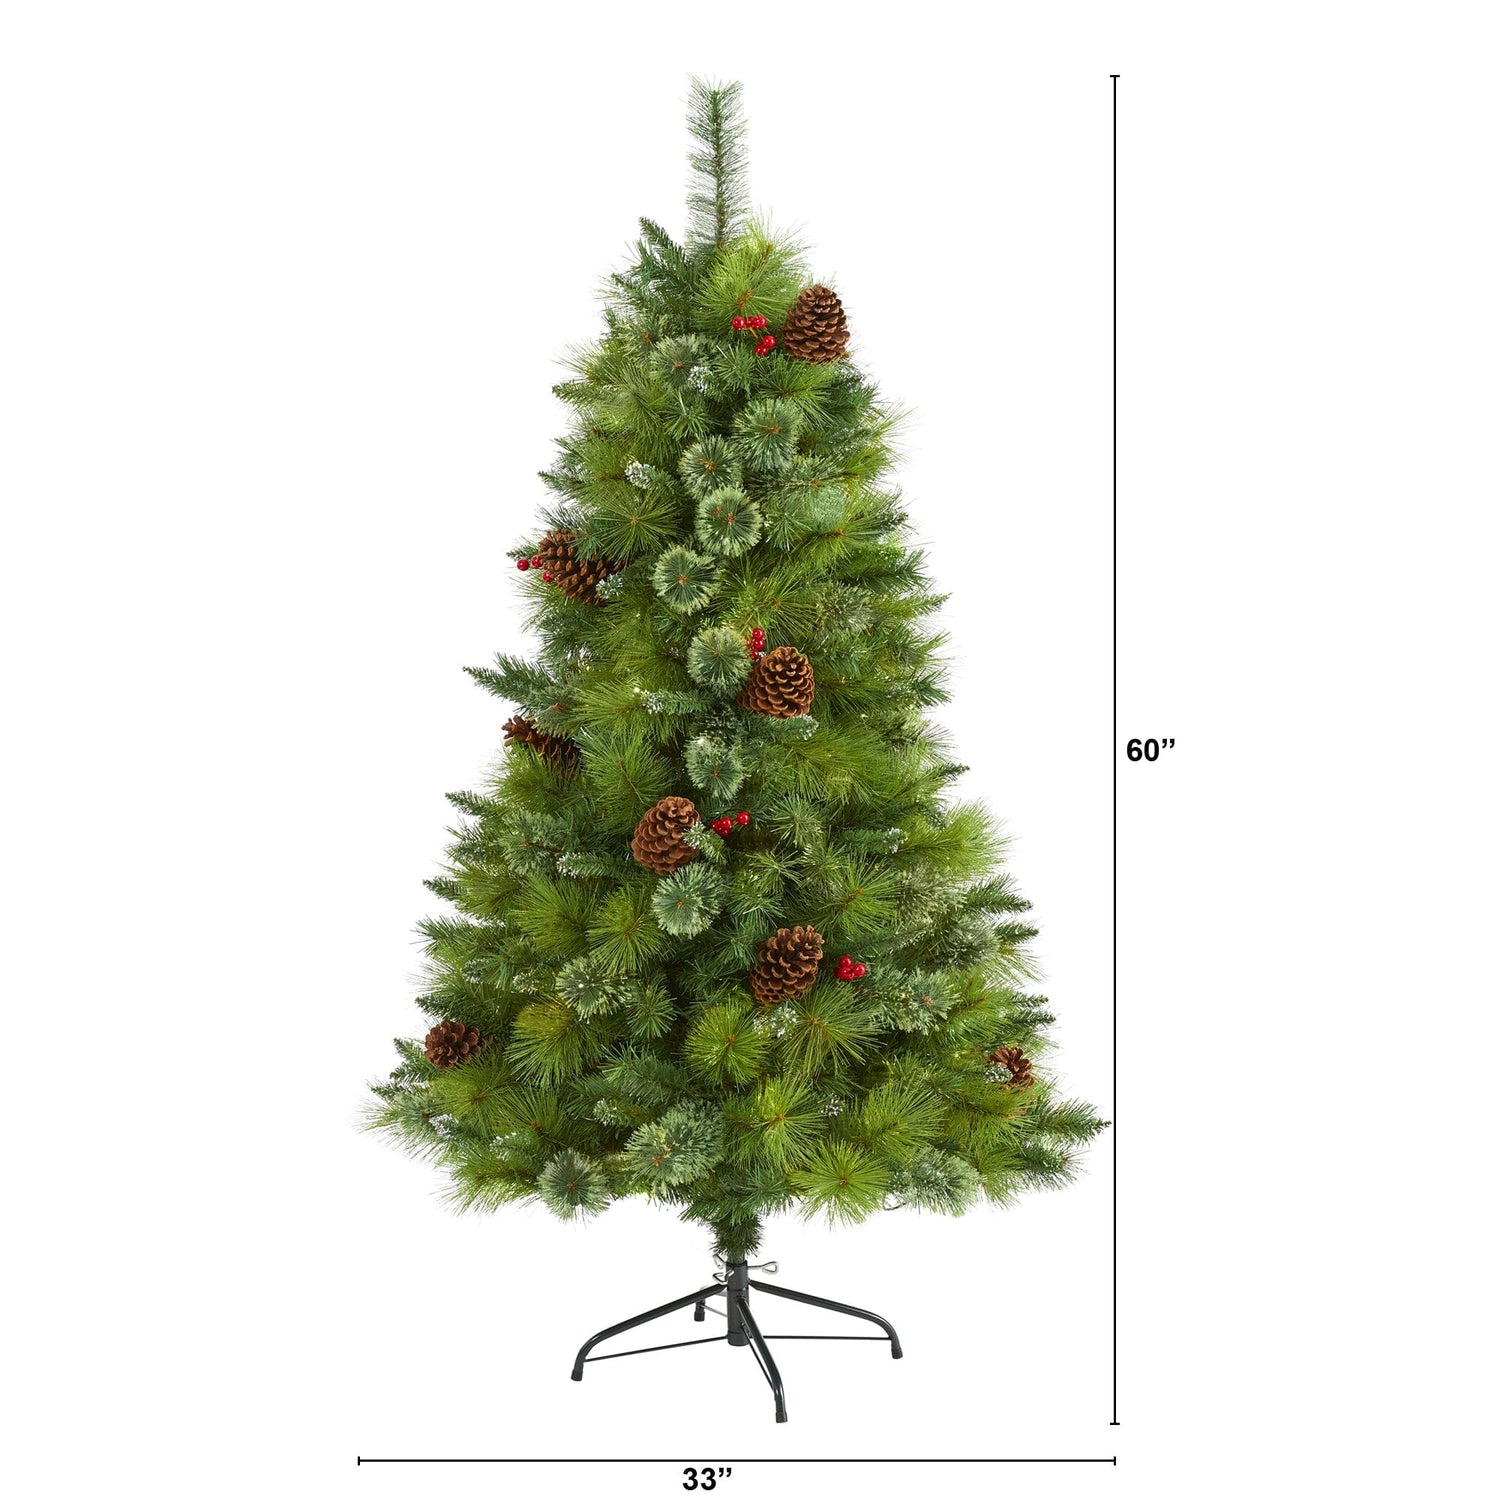 5’ Montana Mixed Pine Artificial Christmas Tree with Pine Cones, Berries and 510 Bendable Branches